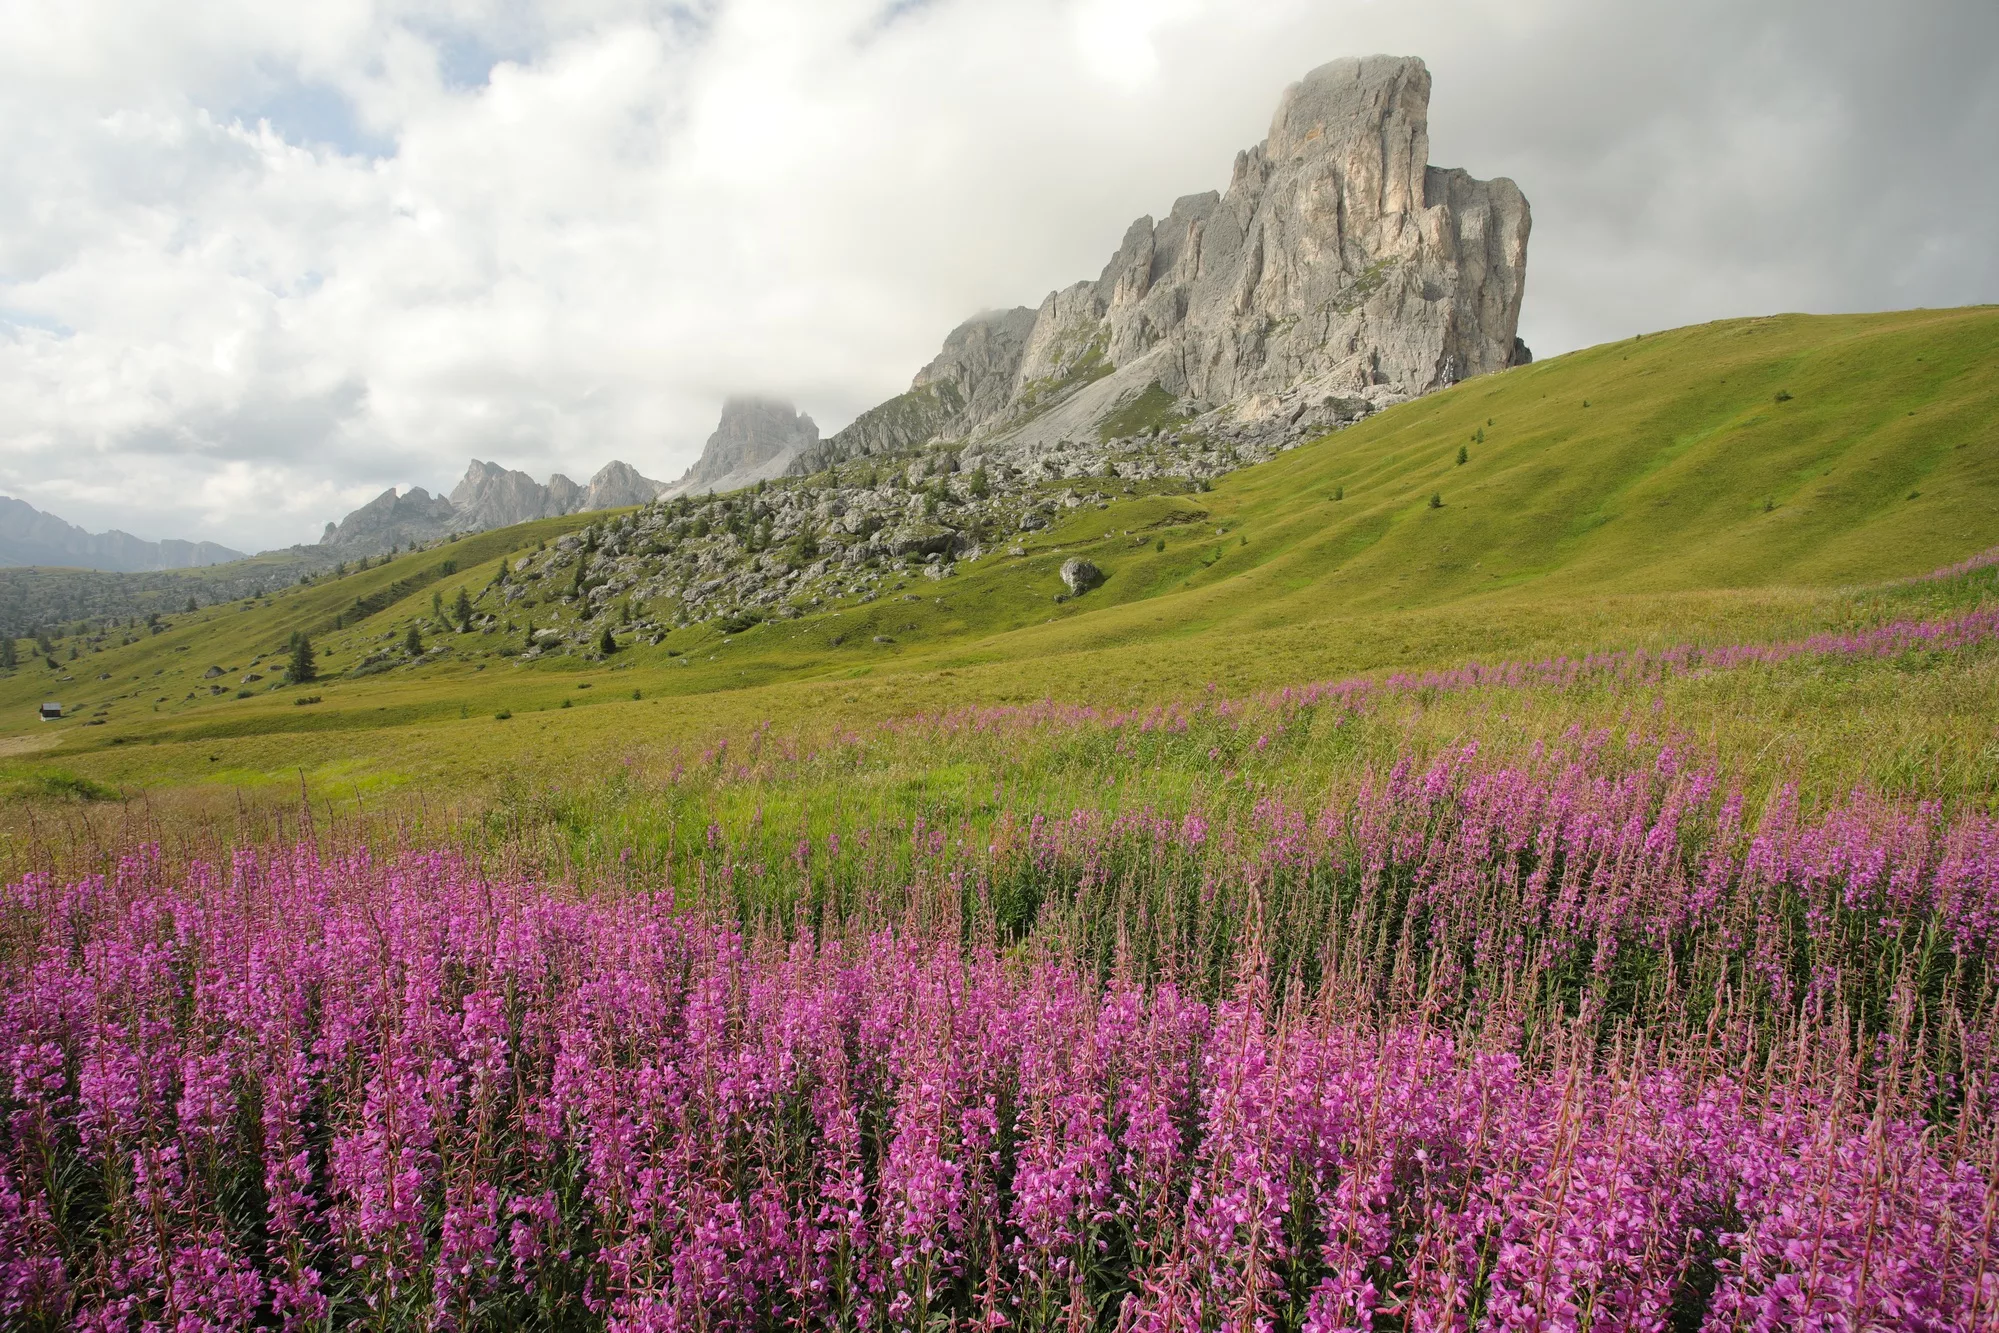 Venice and the Dolomites Photo tour - scenery with pink flowers